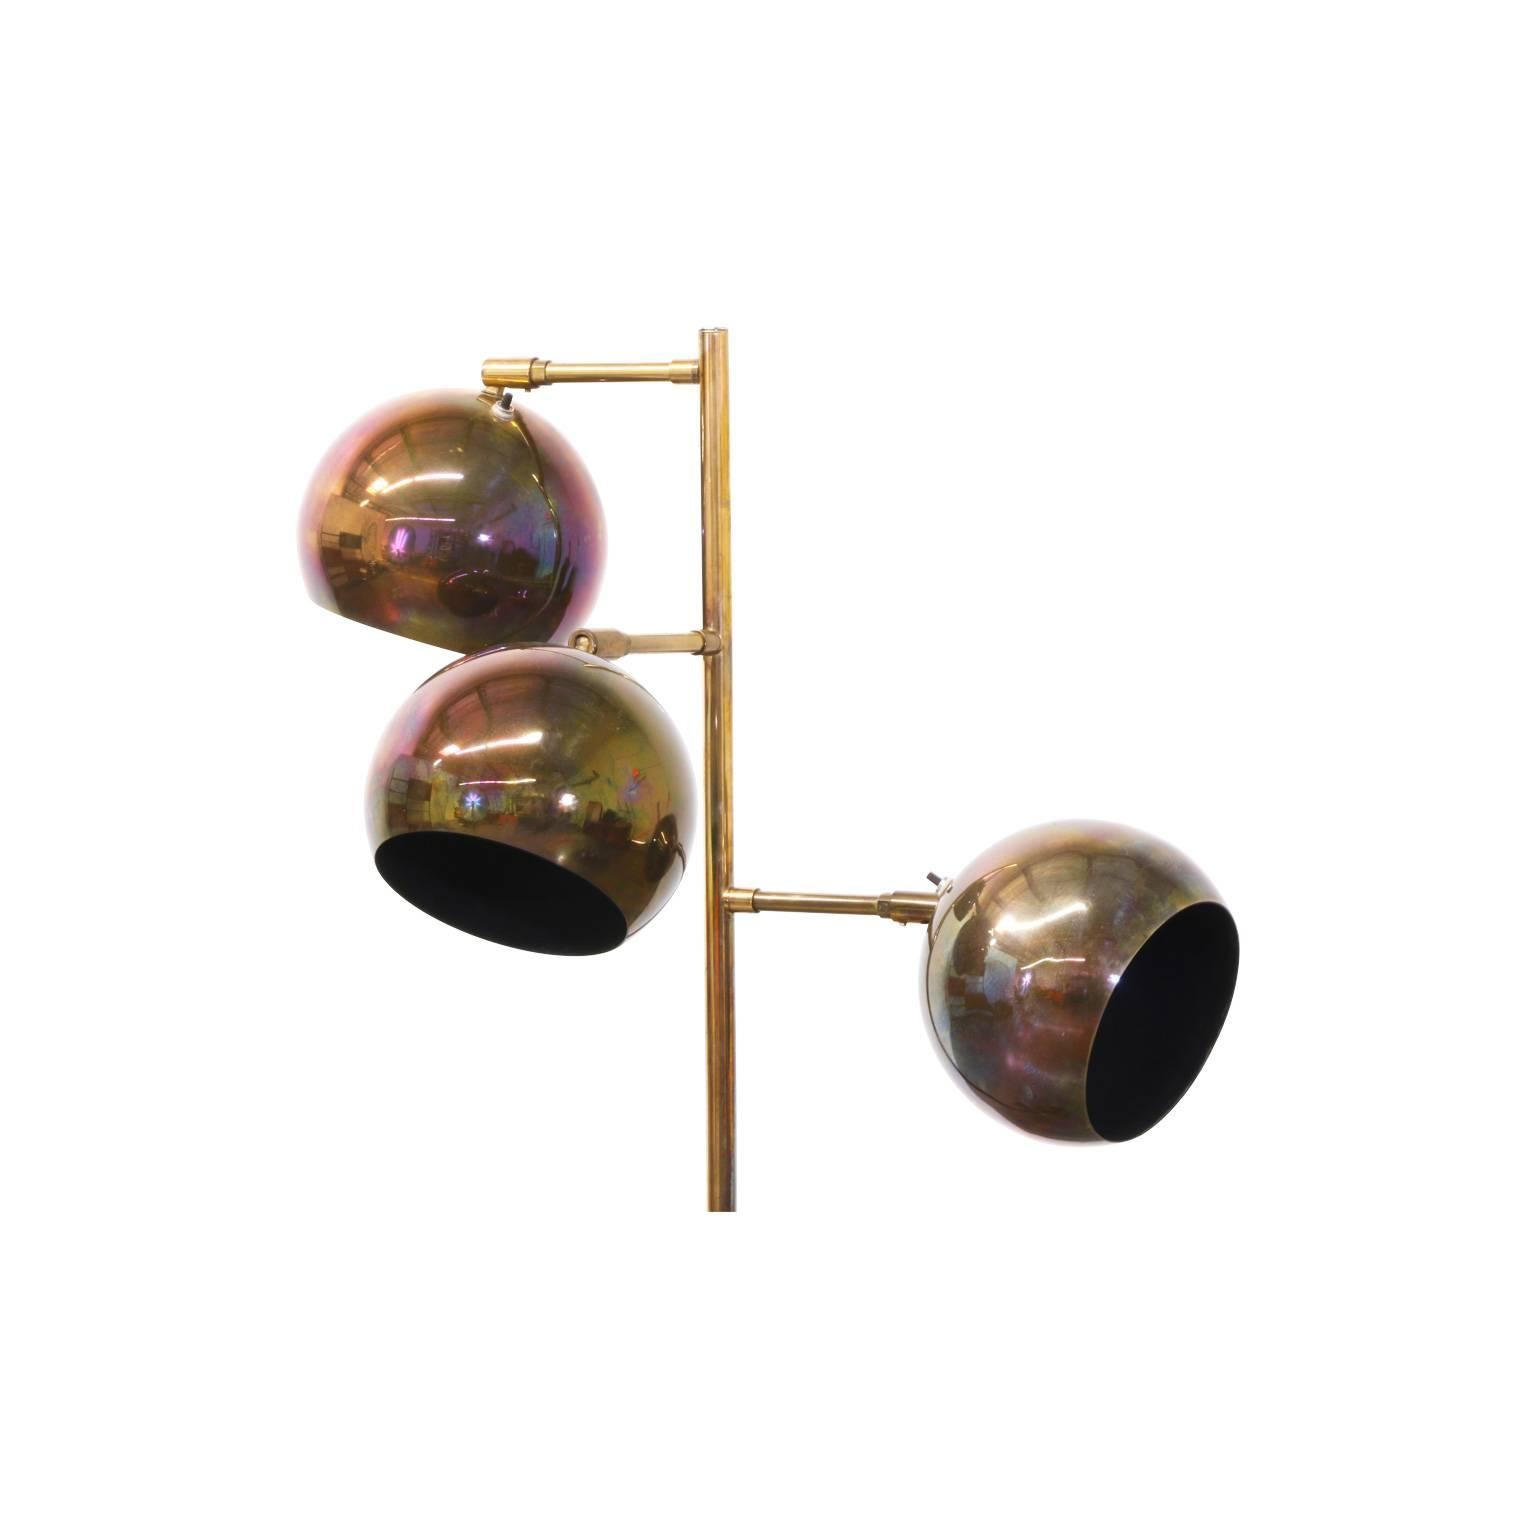 Designer: Koch & Lowy
Manufacturer: Koch & Lowy
Period/Style: Mid Century Modern
Country: United States
Date: 1970’s

Dimensions: 58″H x 8″W
Materials: Brass
Condition: Shows patina from age & use
Number of Items: 1
ID Number: 1715